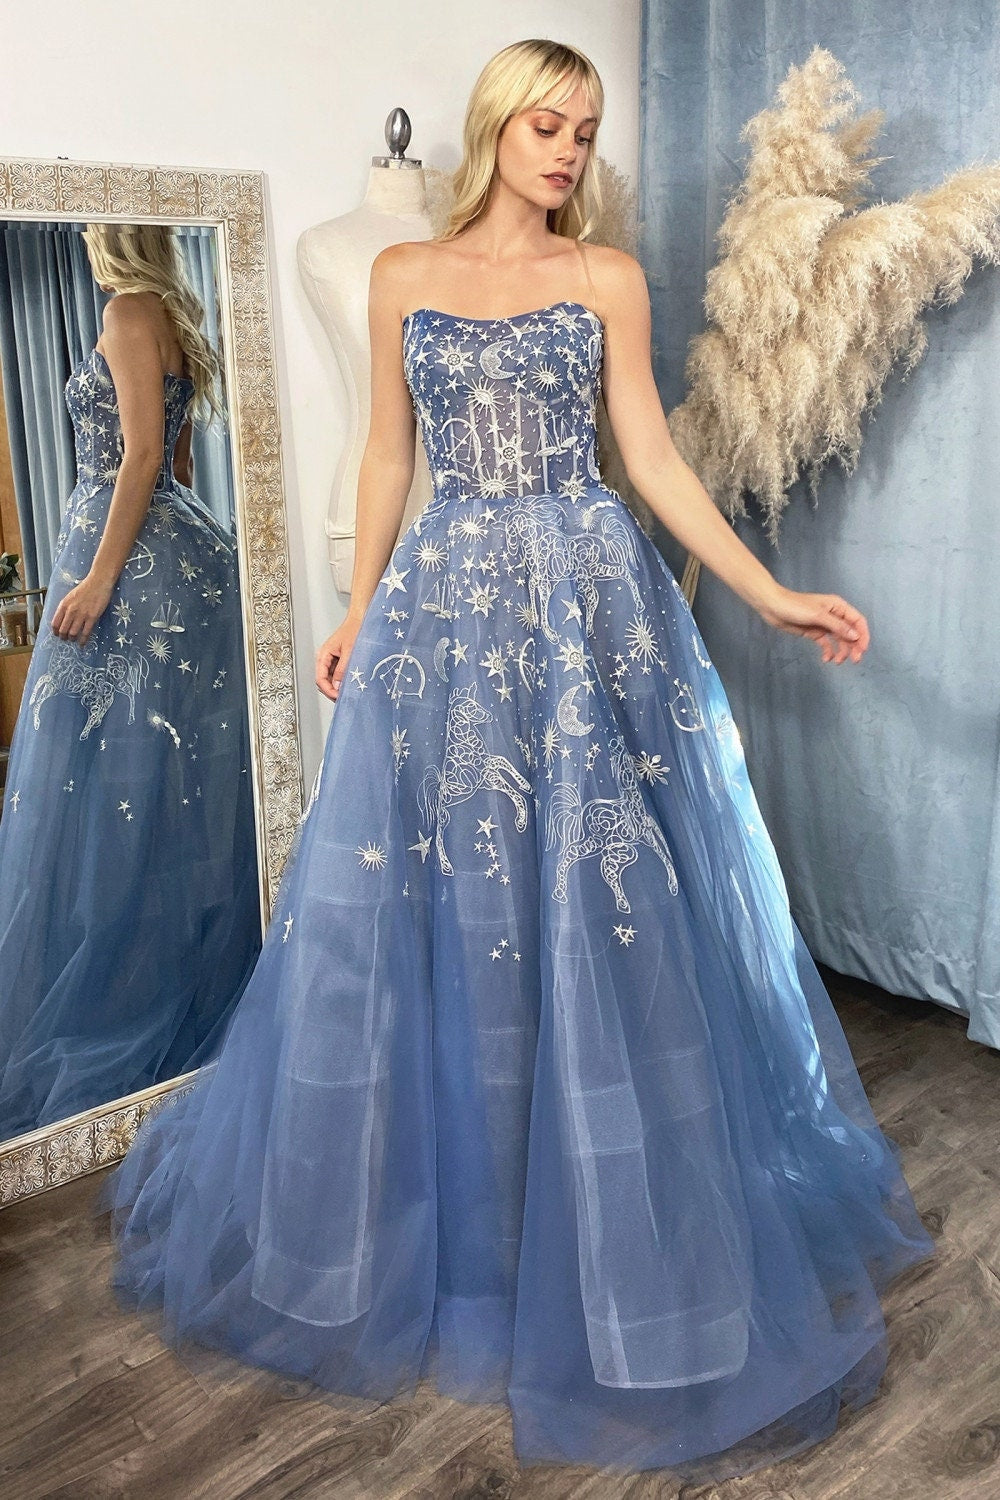 Constellation Dream Sweetheart Embroidered Tulle Ballgown Formal Dress Corset Lace Up Back Sleeveless Strapless Open Back Unique Design Star